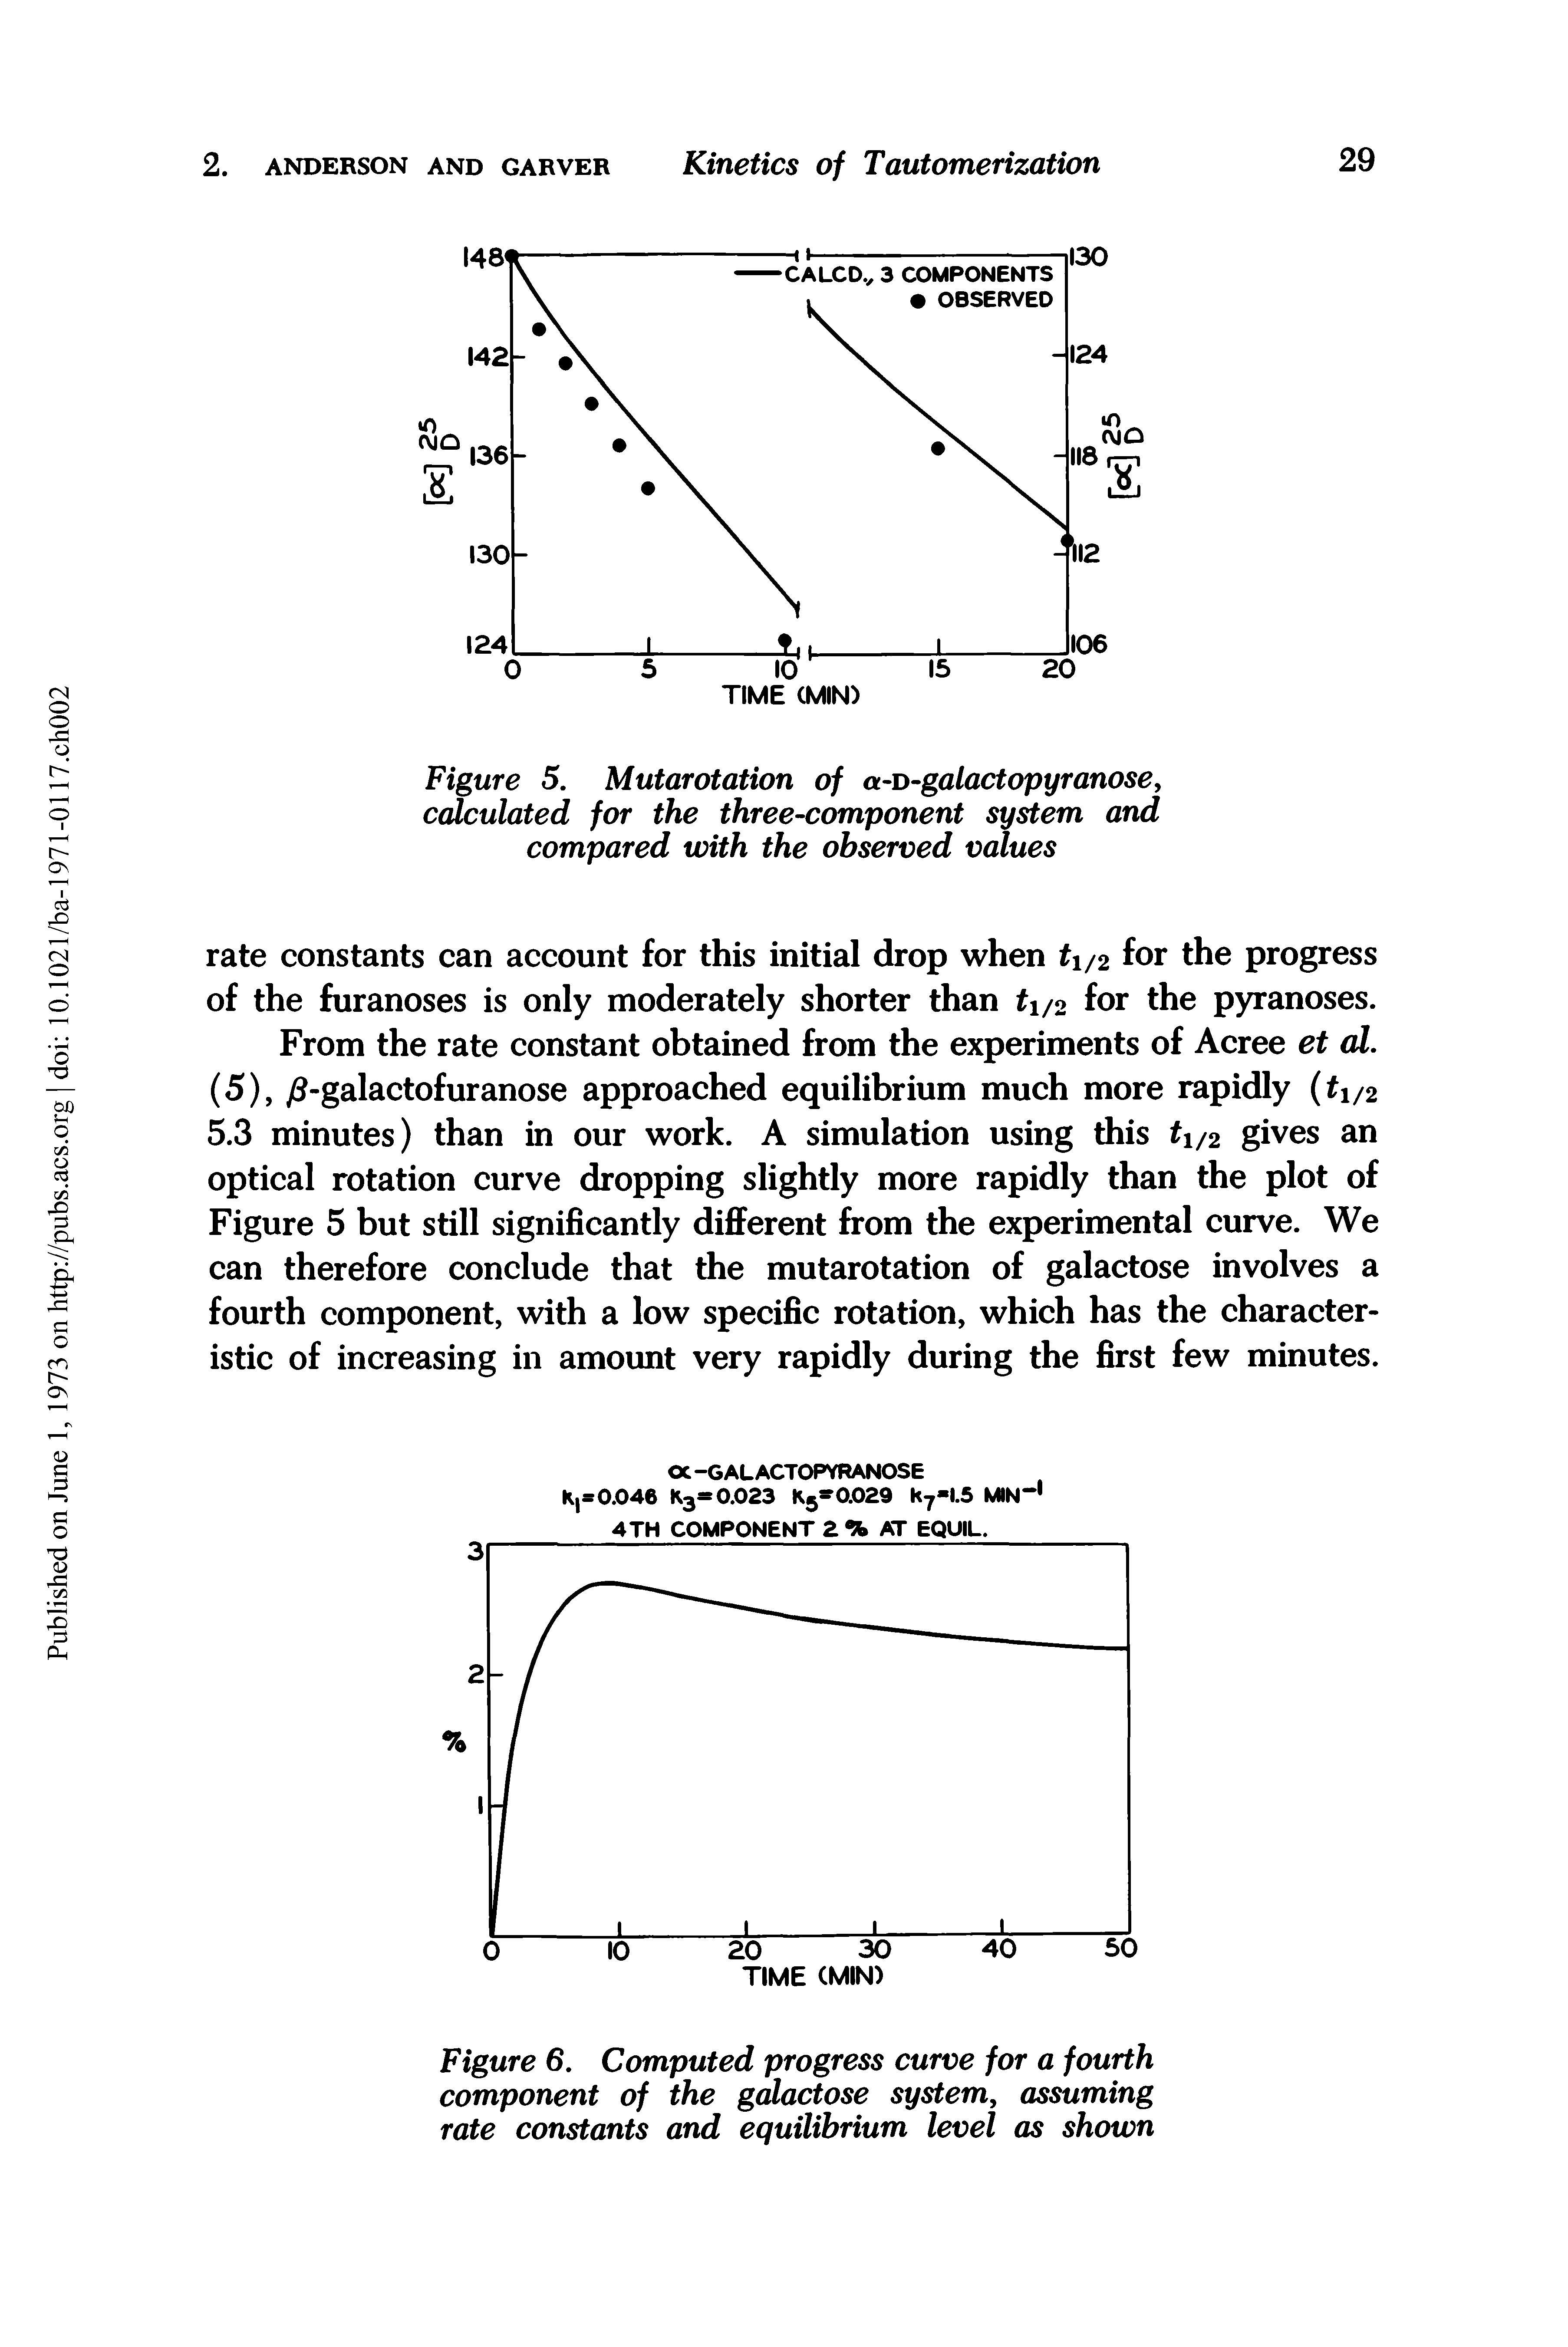 Figure 6. Computed progress curve for a fourth component of the galactose system, assuming rate constants and equilibrium level as shown...